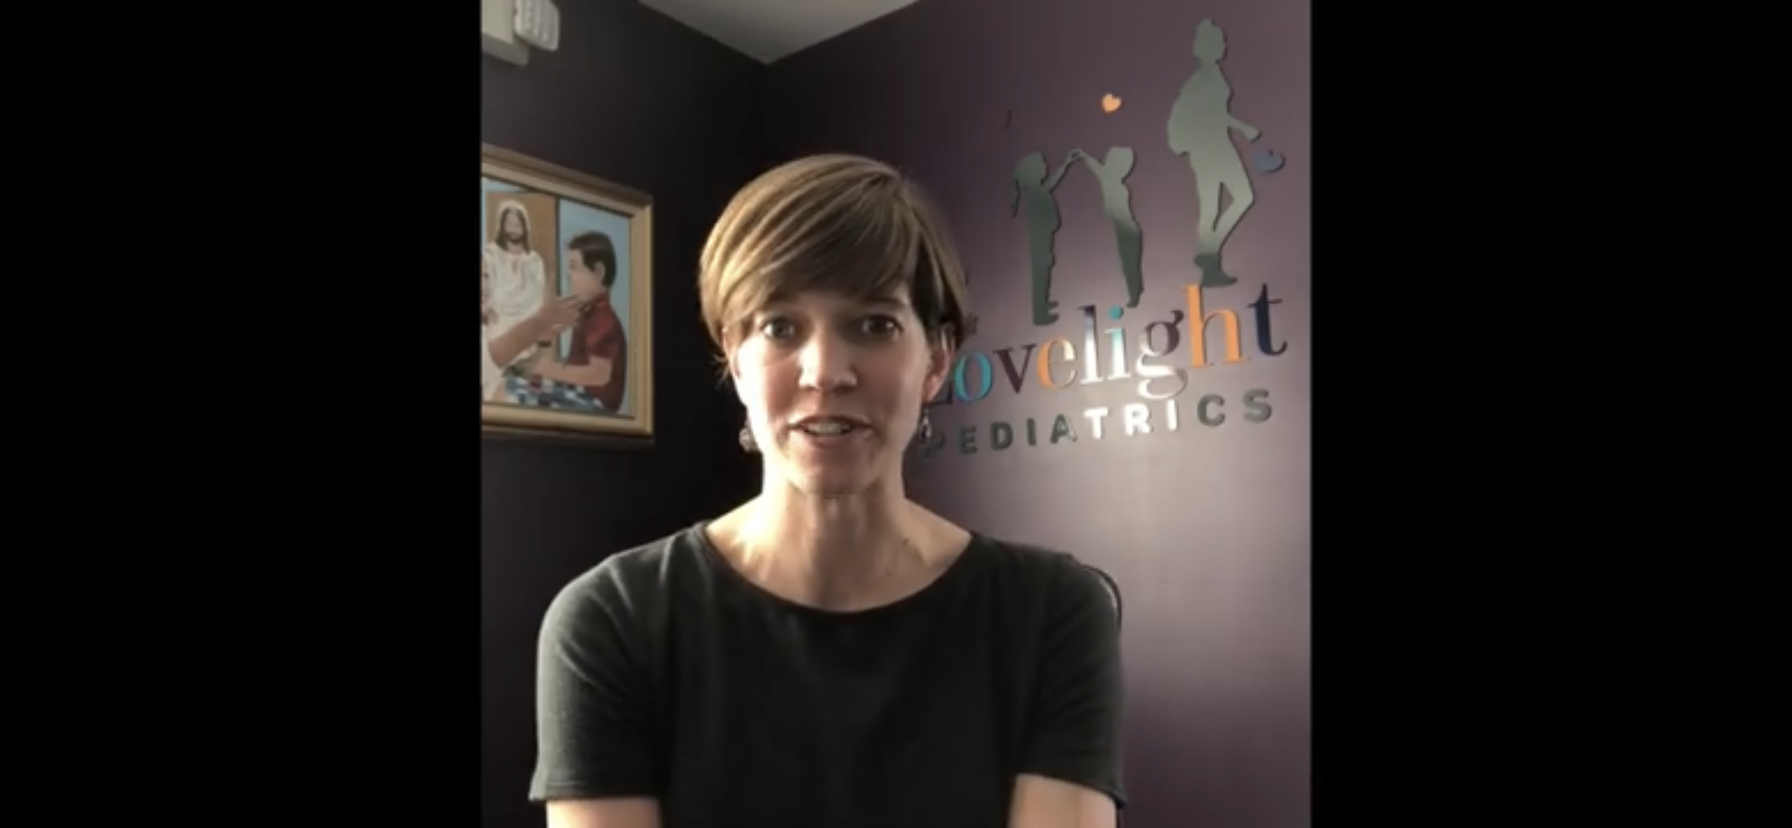 What’s the difference between a family physician and a pediatrician? What’s the difference between a sports physical and a well child visit? Dr. Stephanie Sisler from Lovelight Pediatrics explains! – +3 Prize Points!